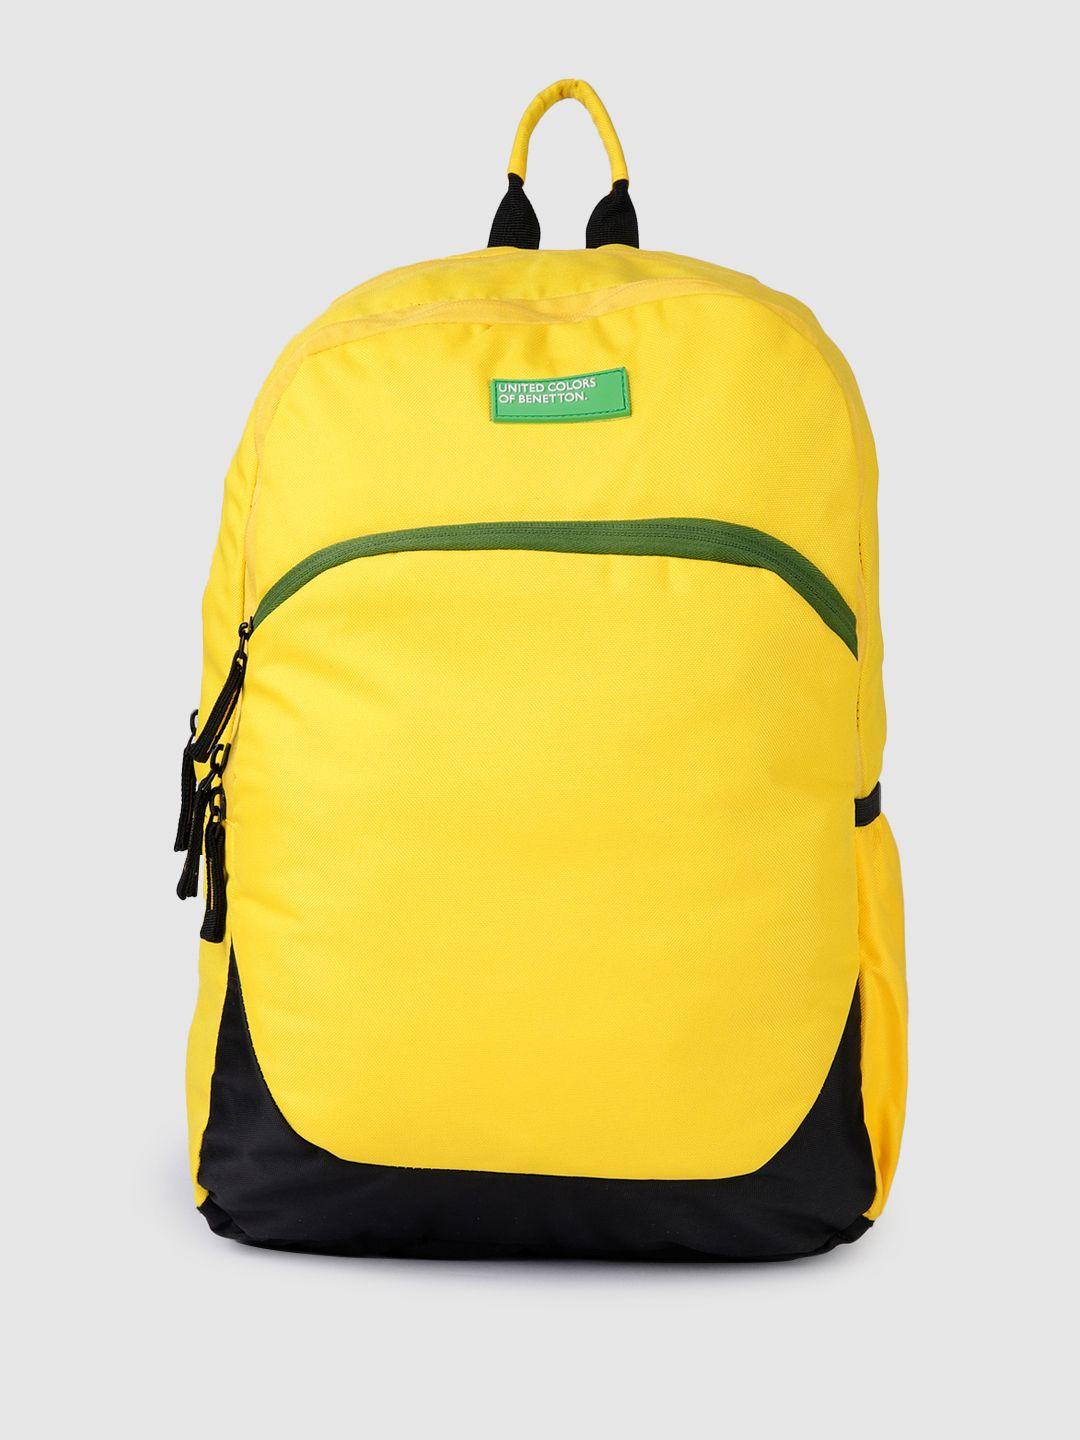 united colors of benetton unisex colourblocked laptop backpack with brand logo applique